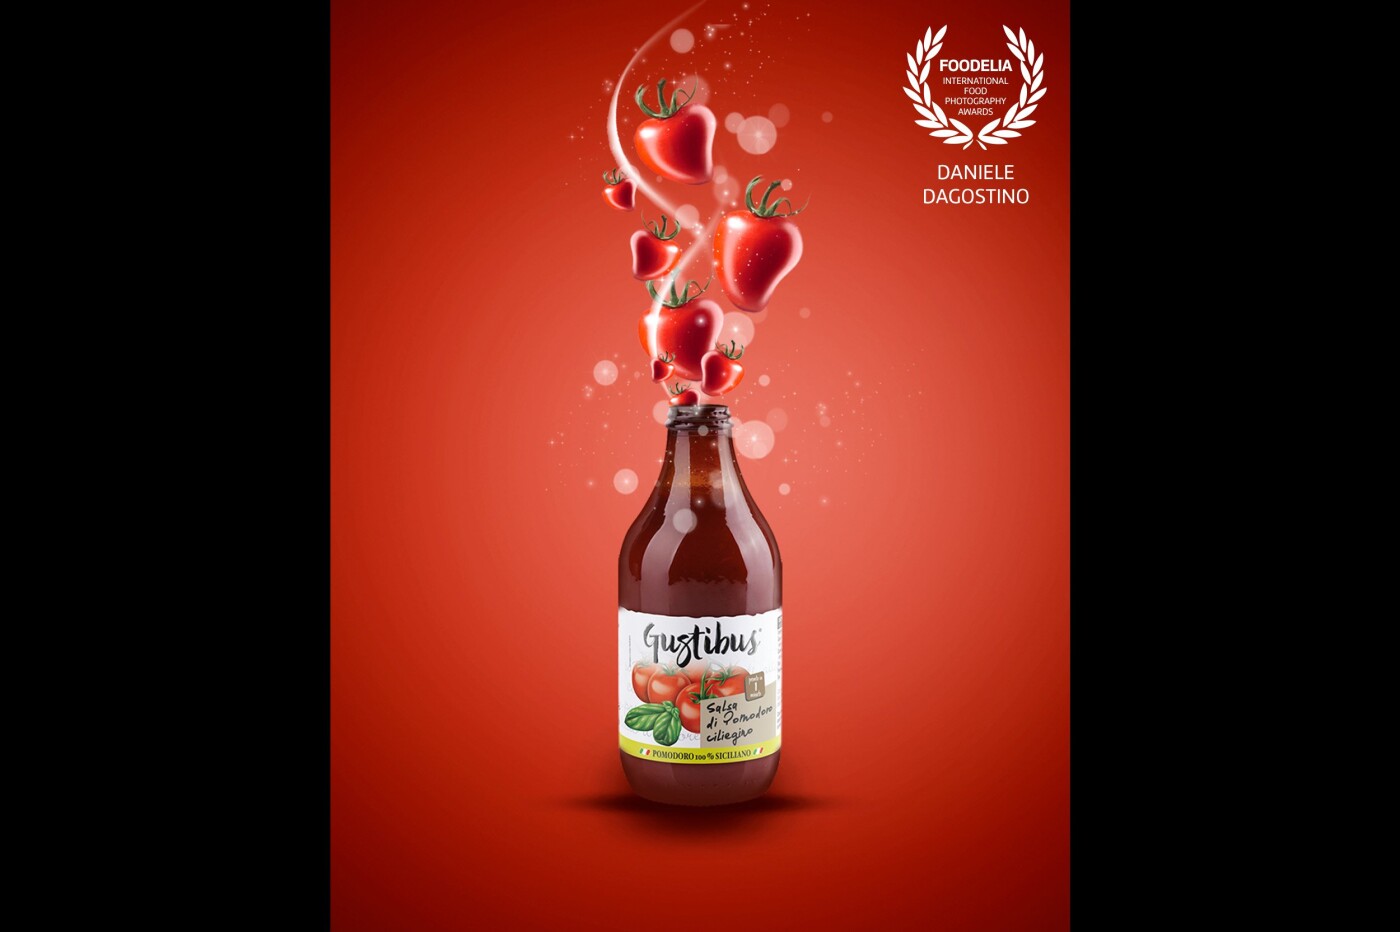 Advertising campaign for social about the love for ingredients and choosing the best quality. The client is Gustibus alimentari.<br />
